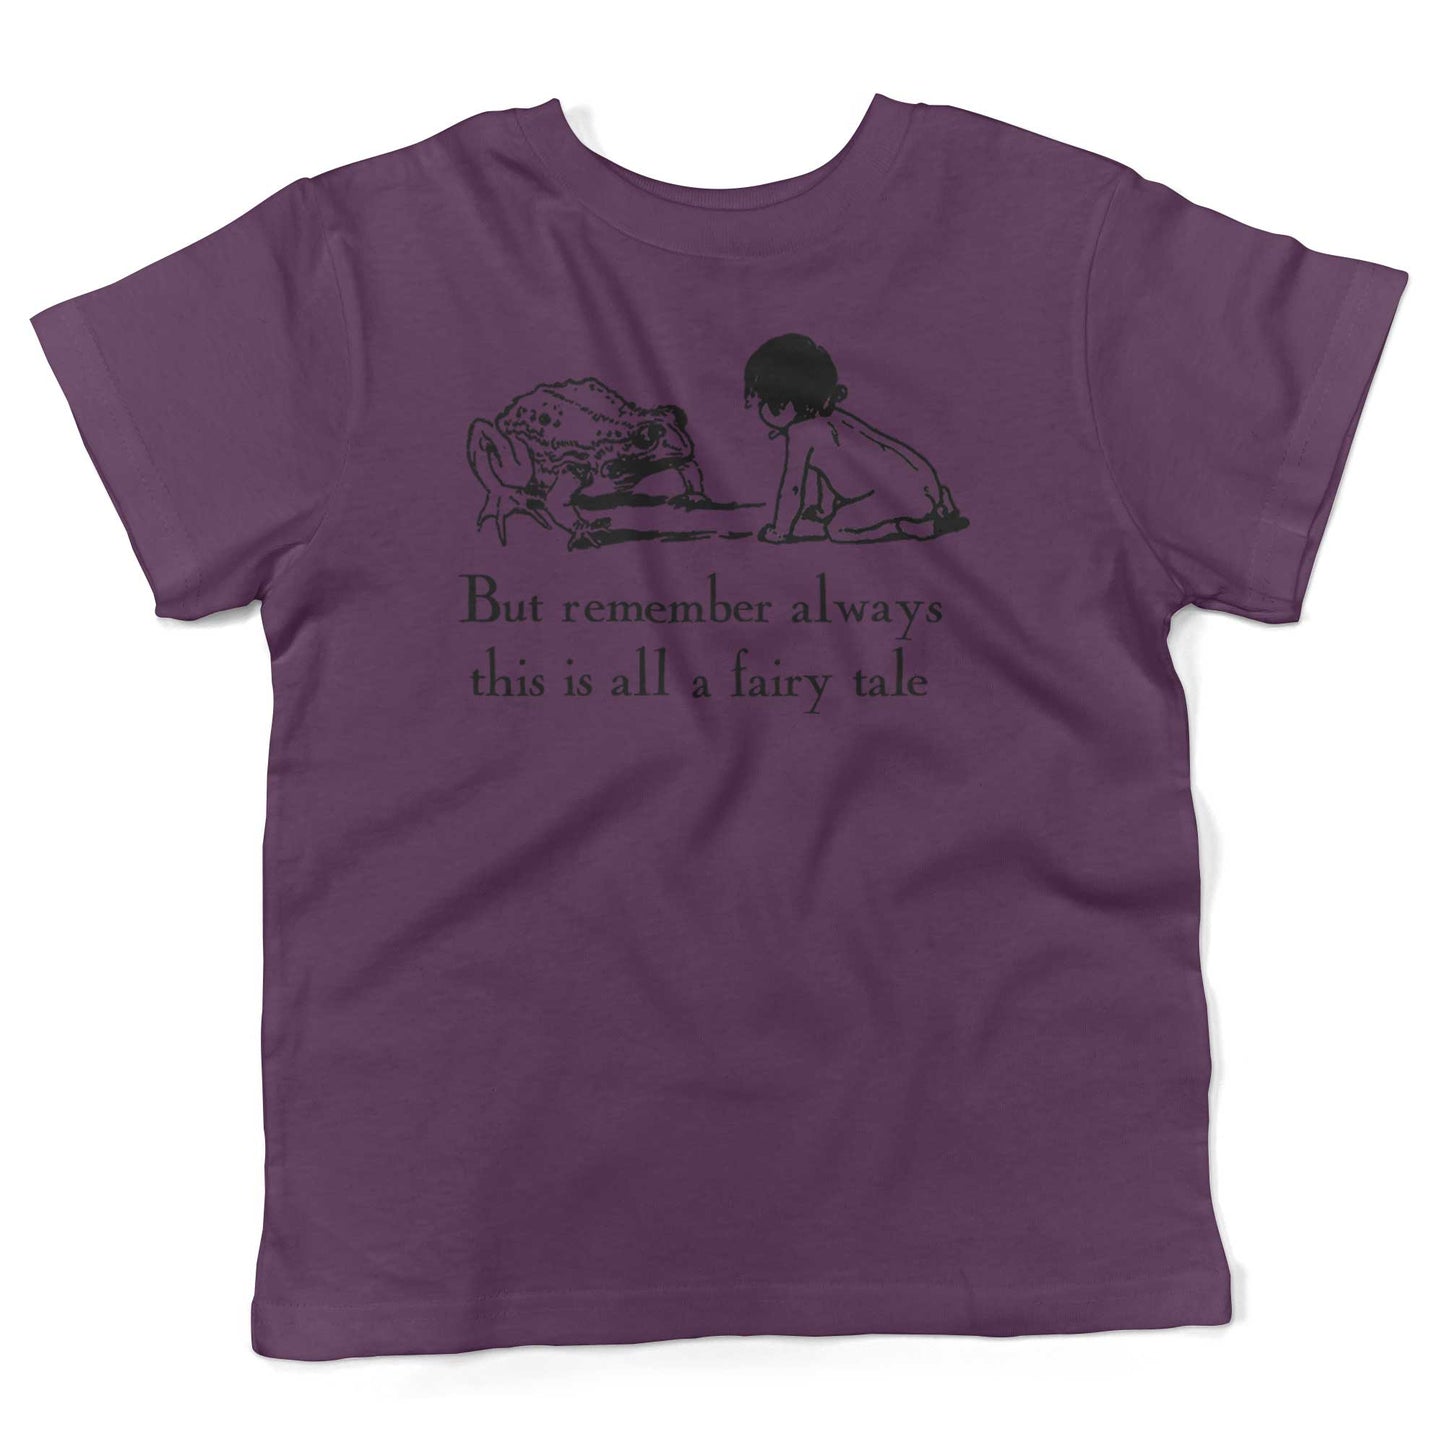 But remember always this is all a fairy tale Toddler Shirt-Organic Purple-2T